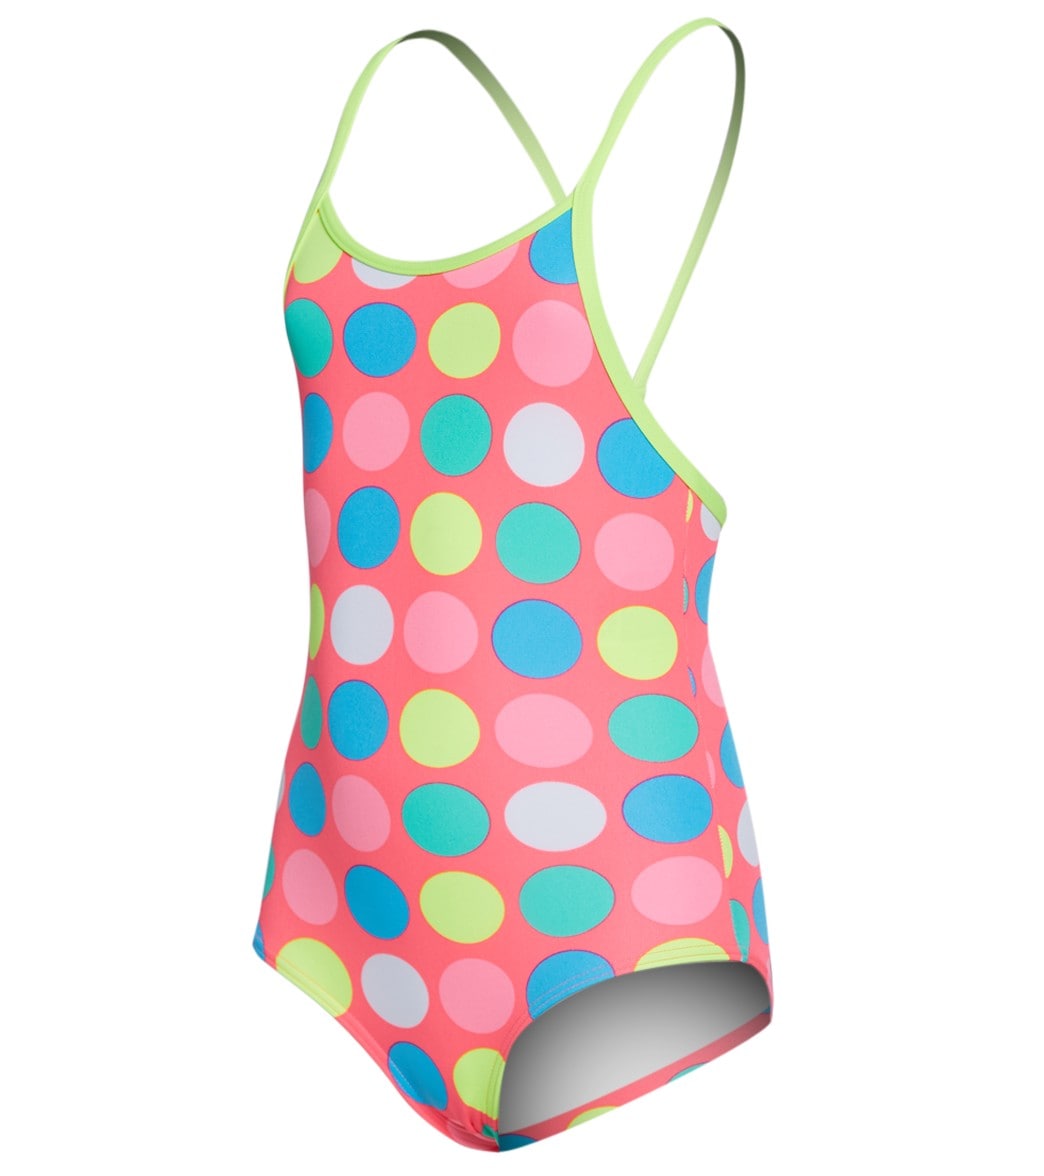 Funkita Toddler Girls' Twister Printed One Piece Swimsuit - Multi Pink 2 Polyester - Swimoutlet.com